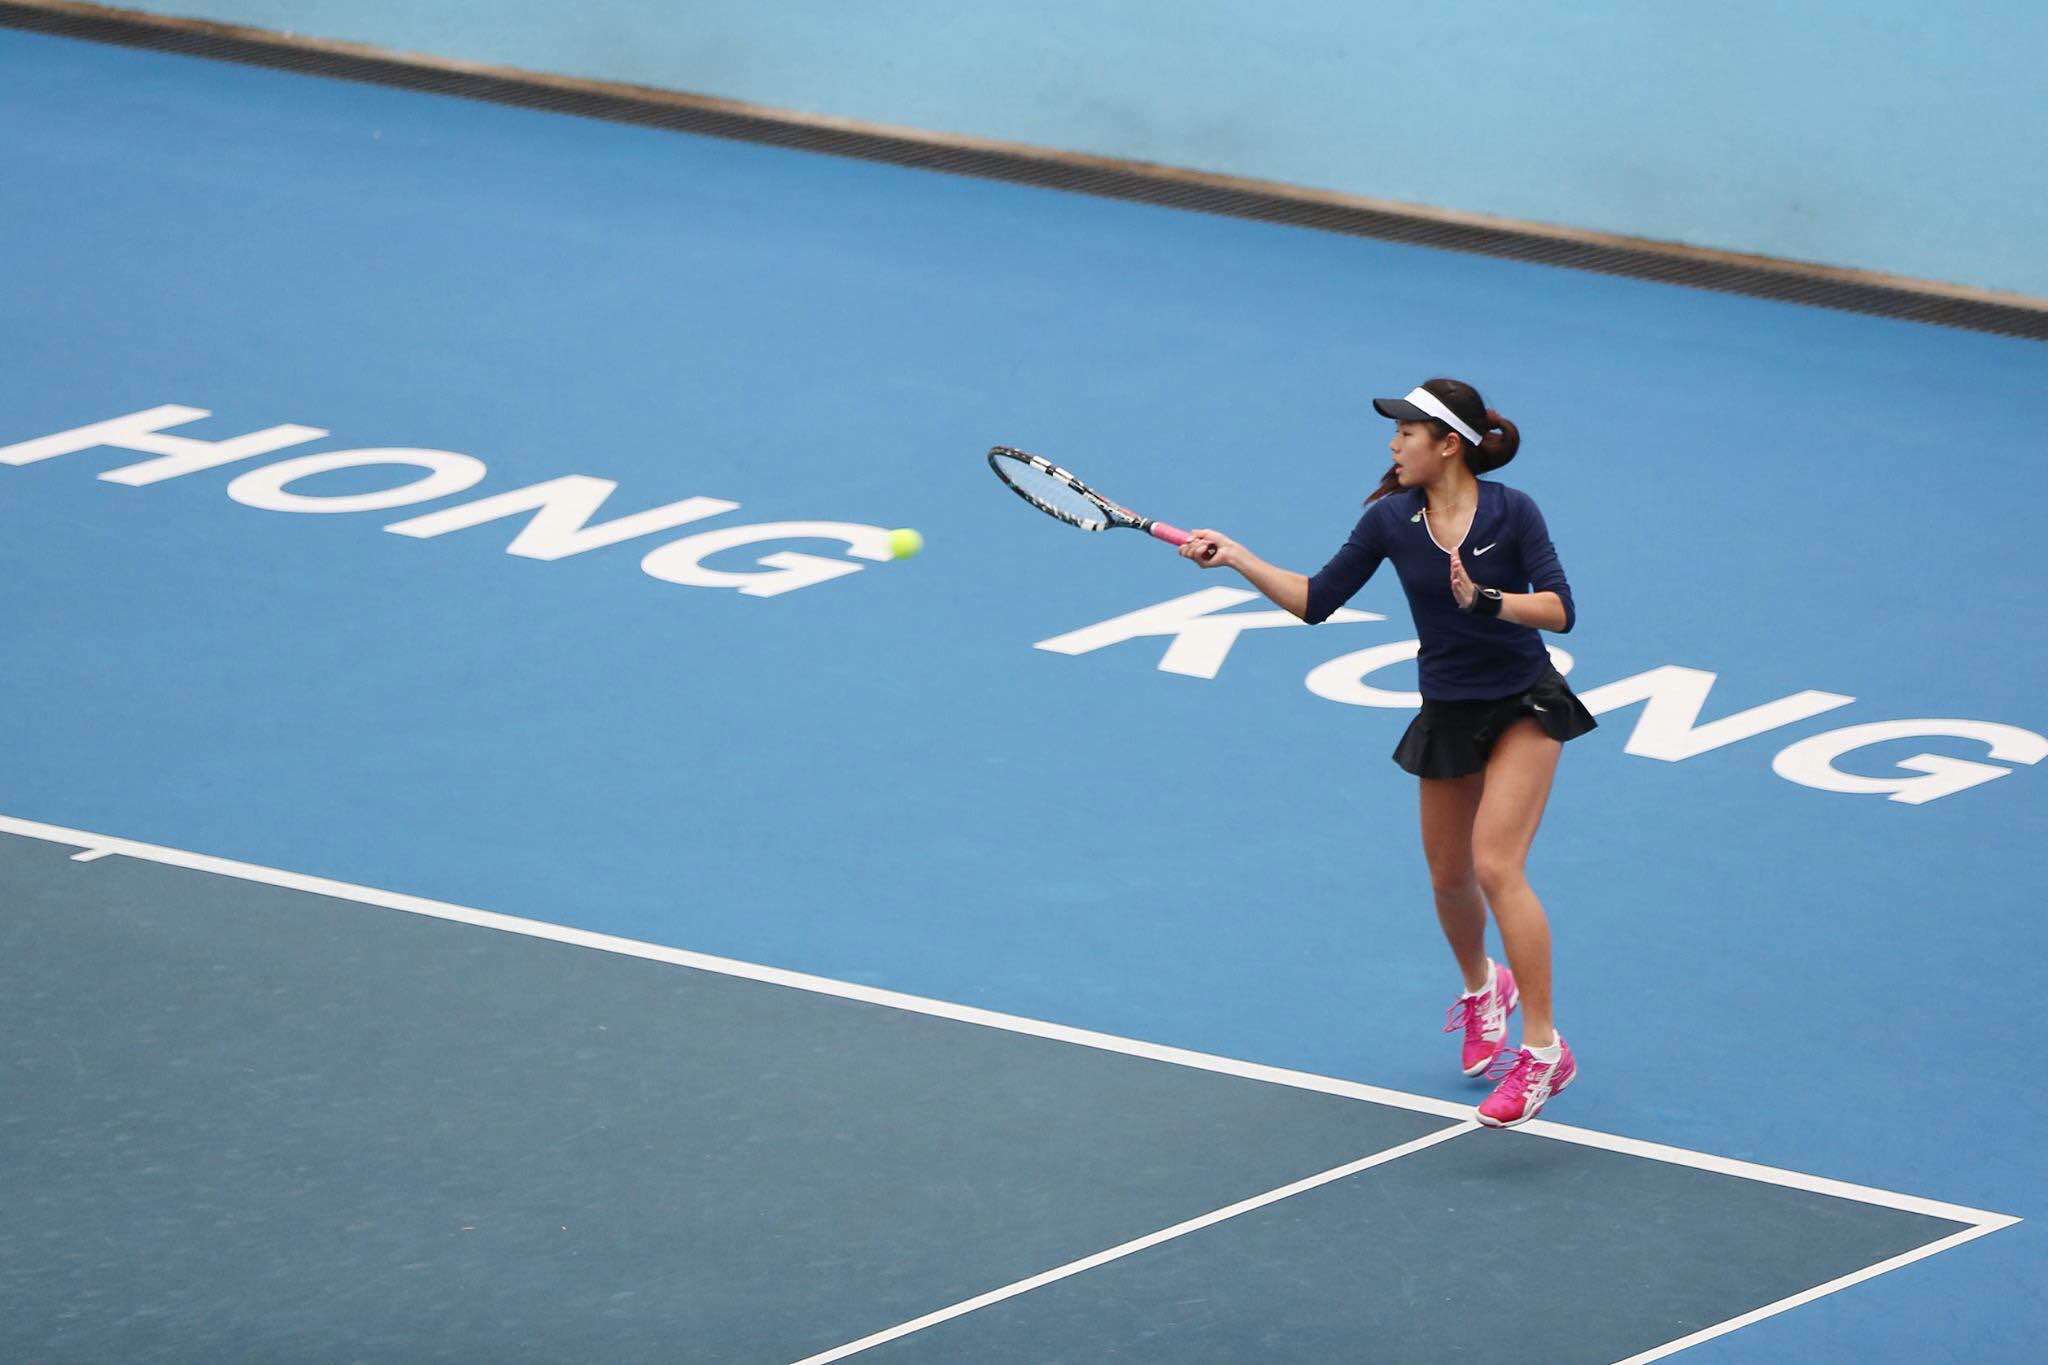 15-year-old Venia Yeung, a student at South Island School, has represented Hong Kong at the international level for tennis.